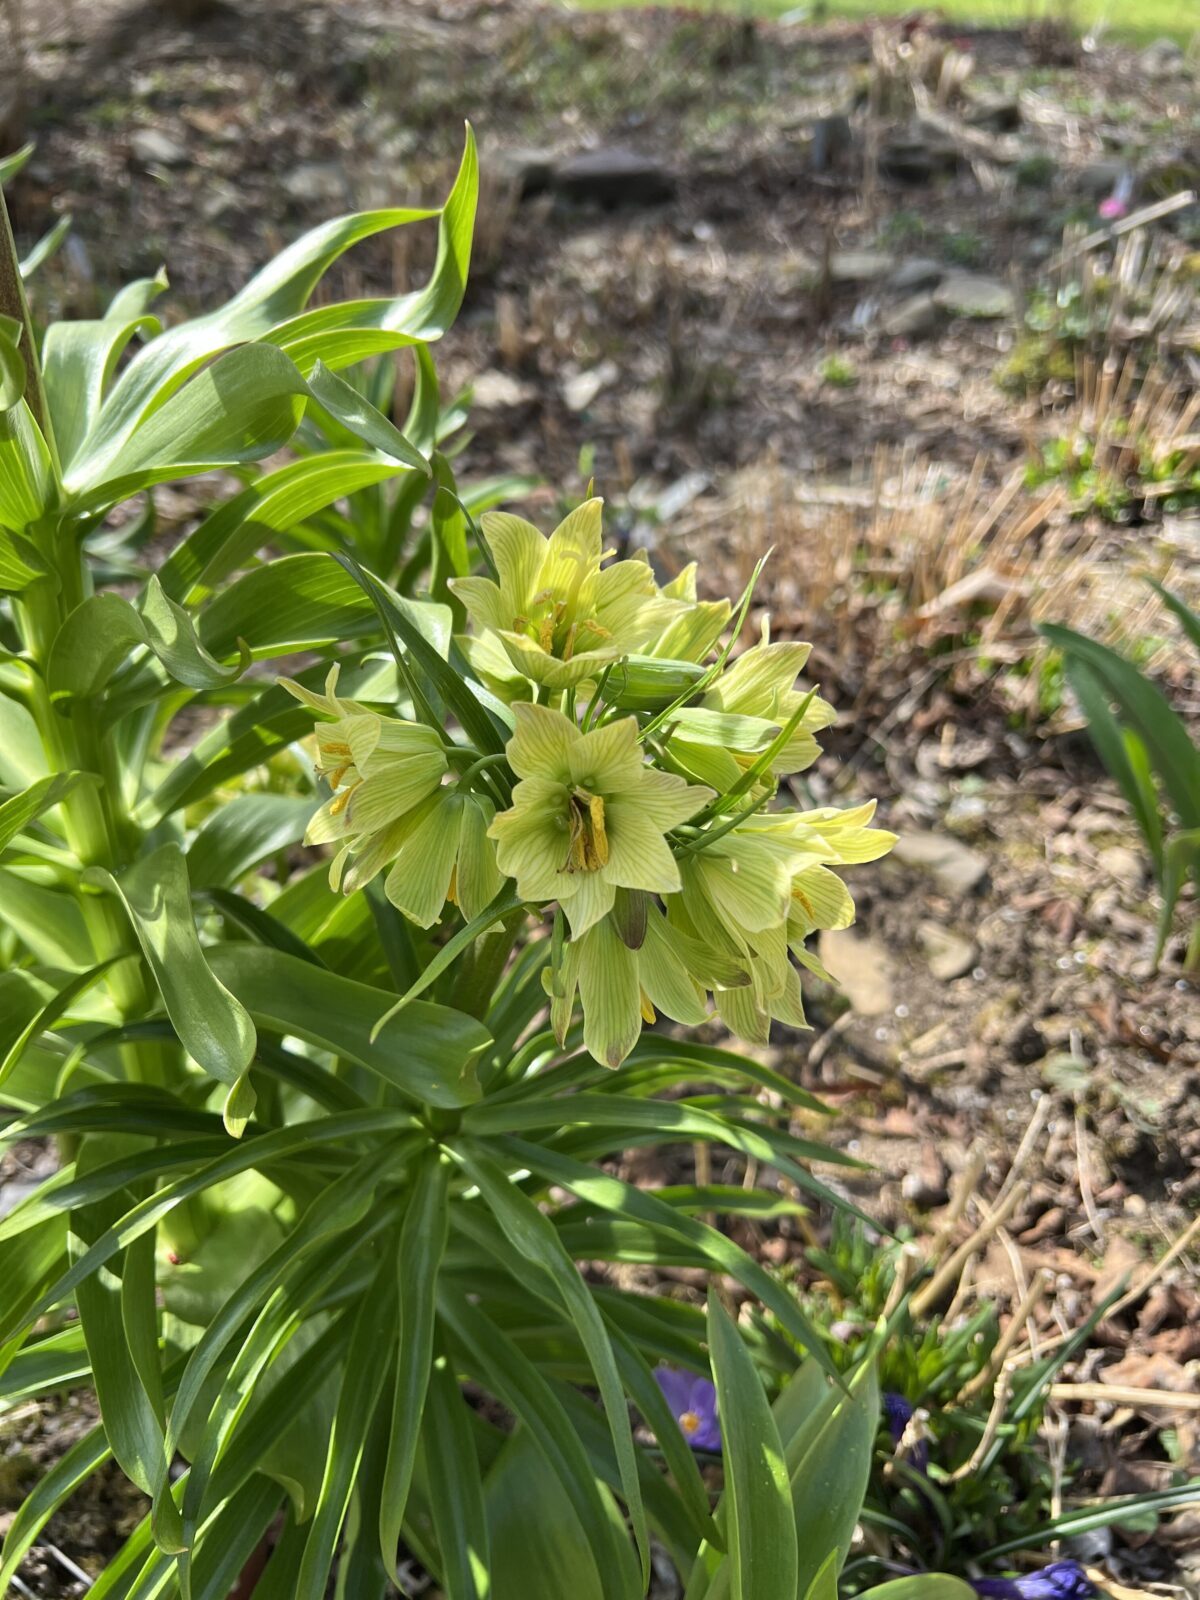 Fritillaria imperialis Lutea is deer proof and to some degree a deer repellant. It flowers on the East End in early to mid April and goes totally dormant in the summer.
ANDREW MESSINGER